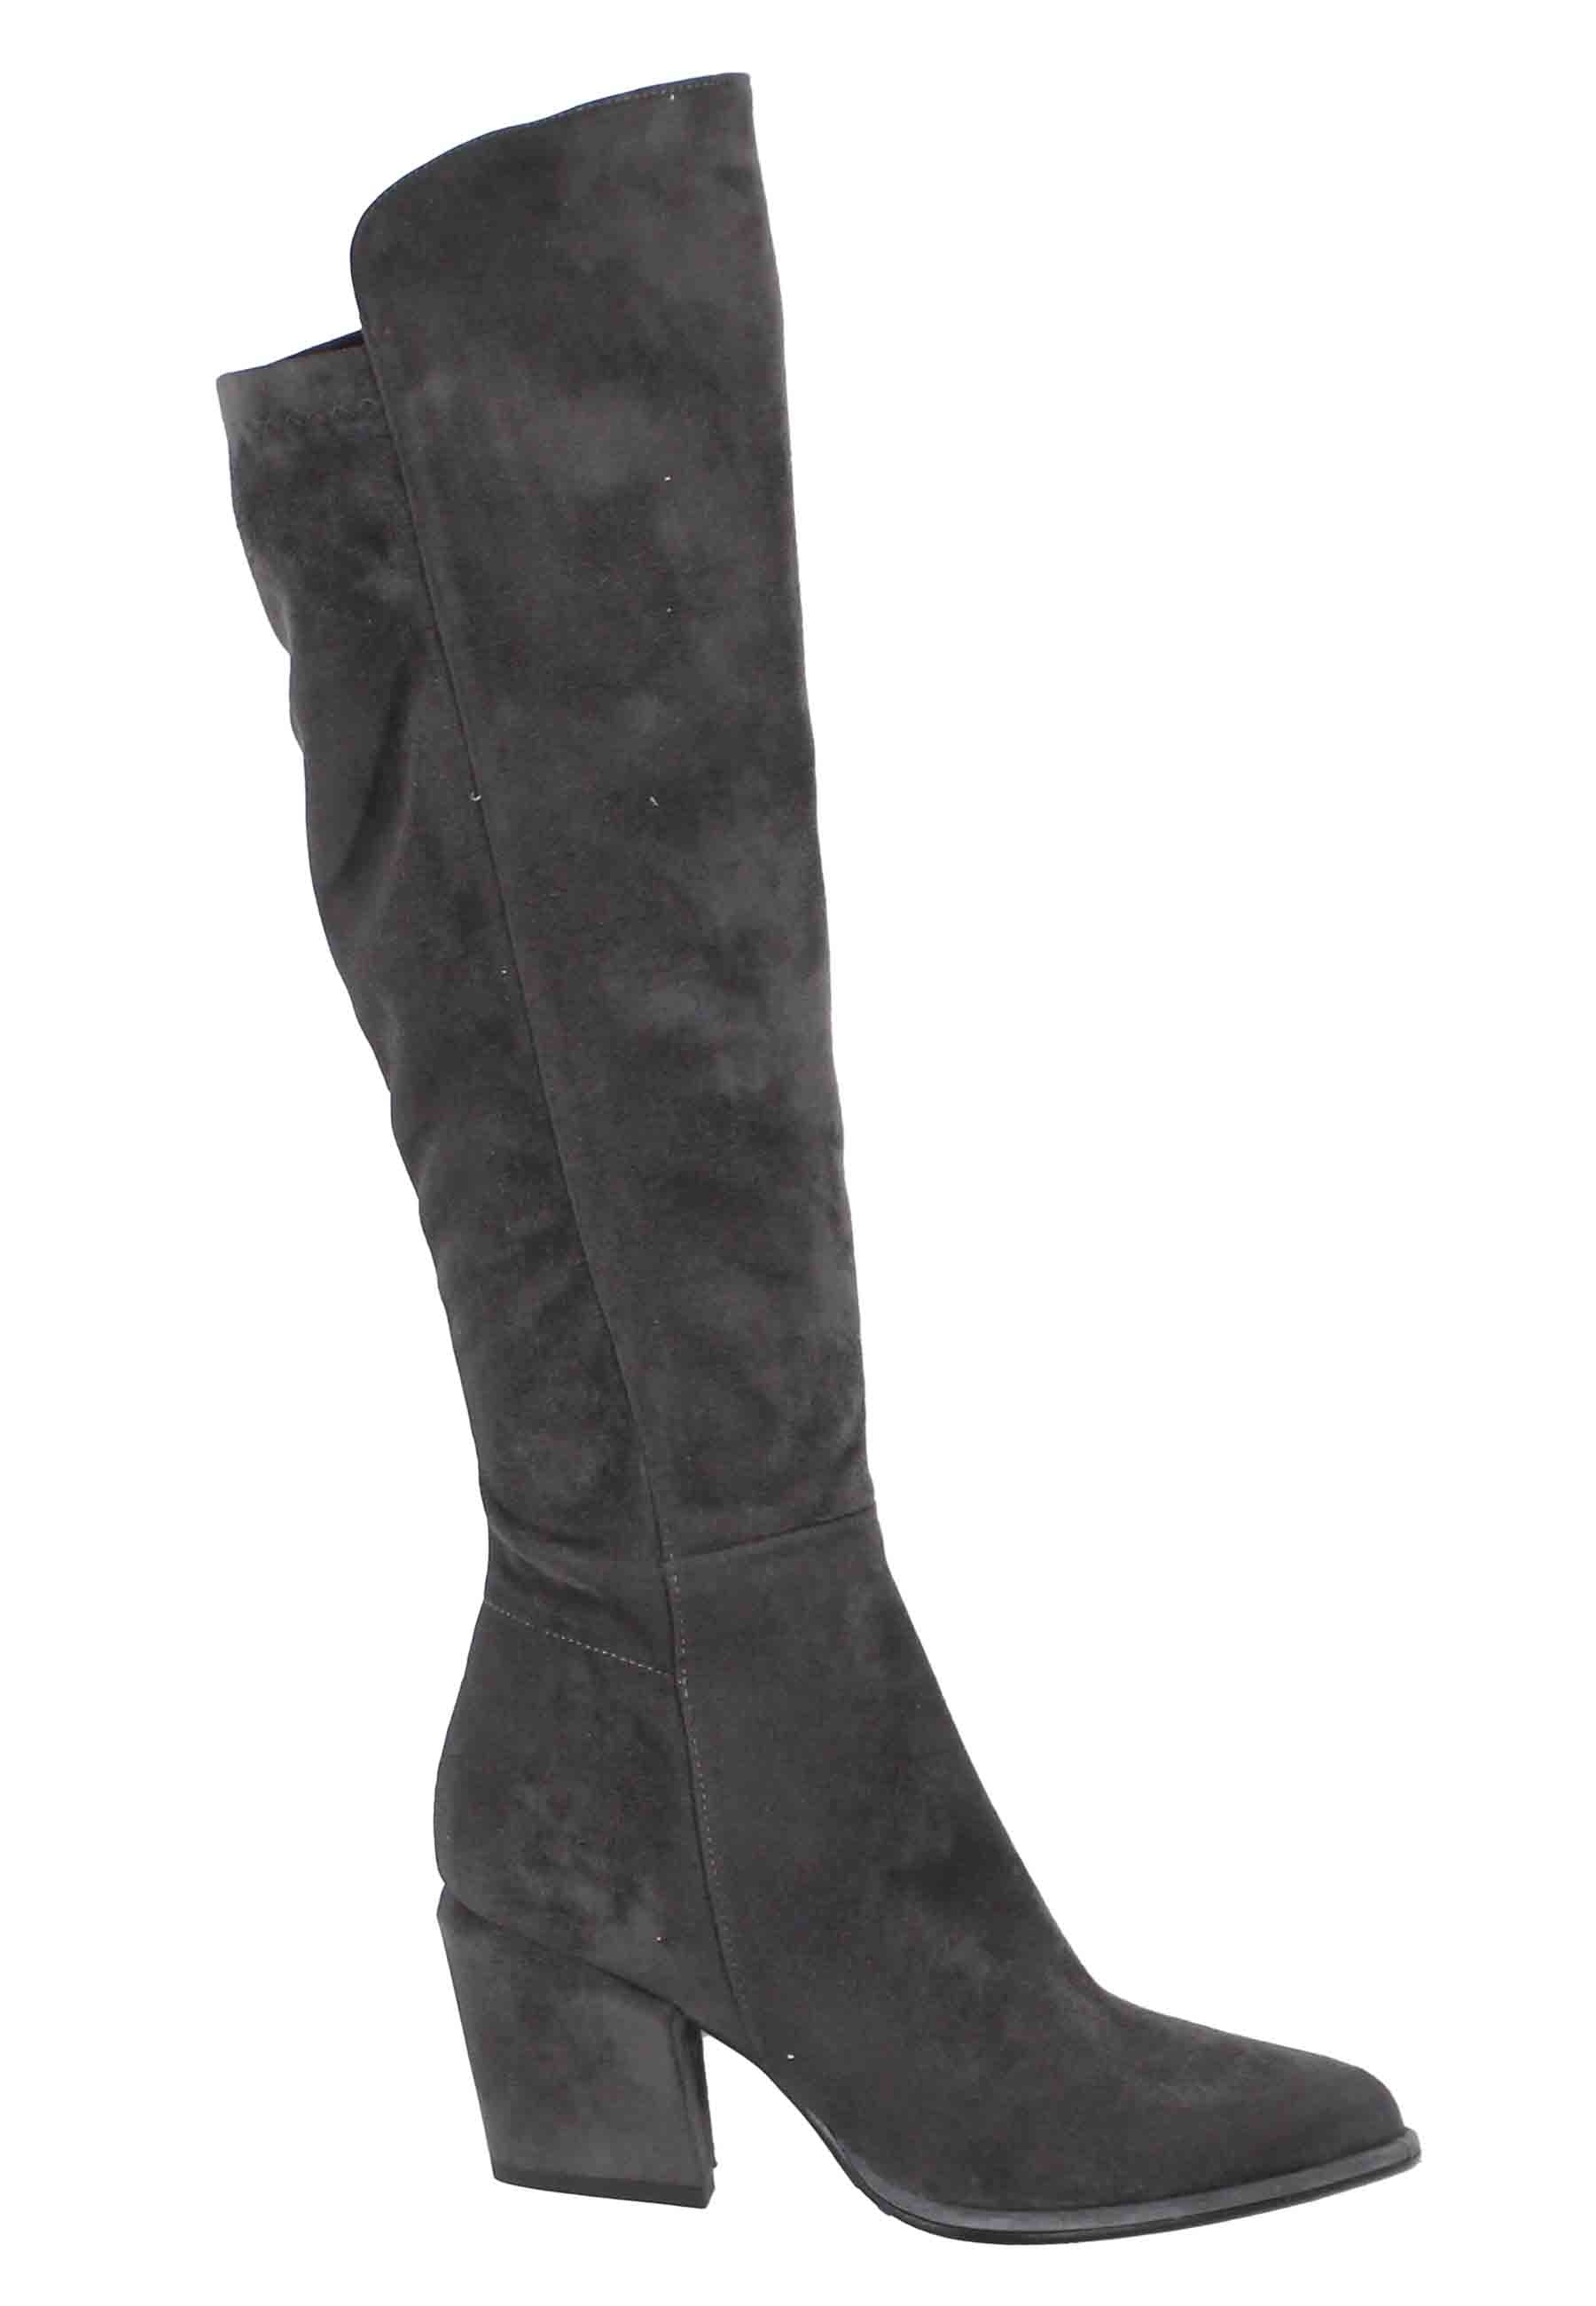 Women's boots in gray stretch eco suede